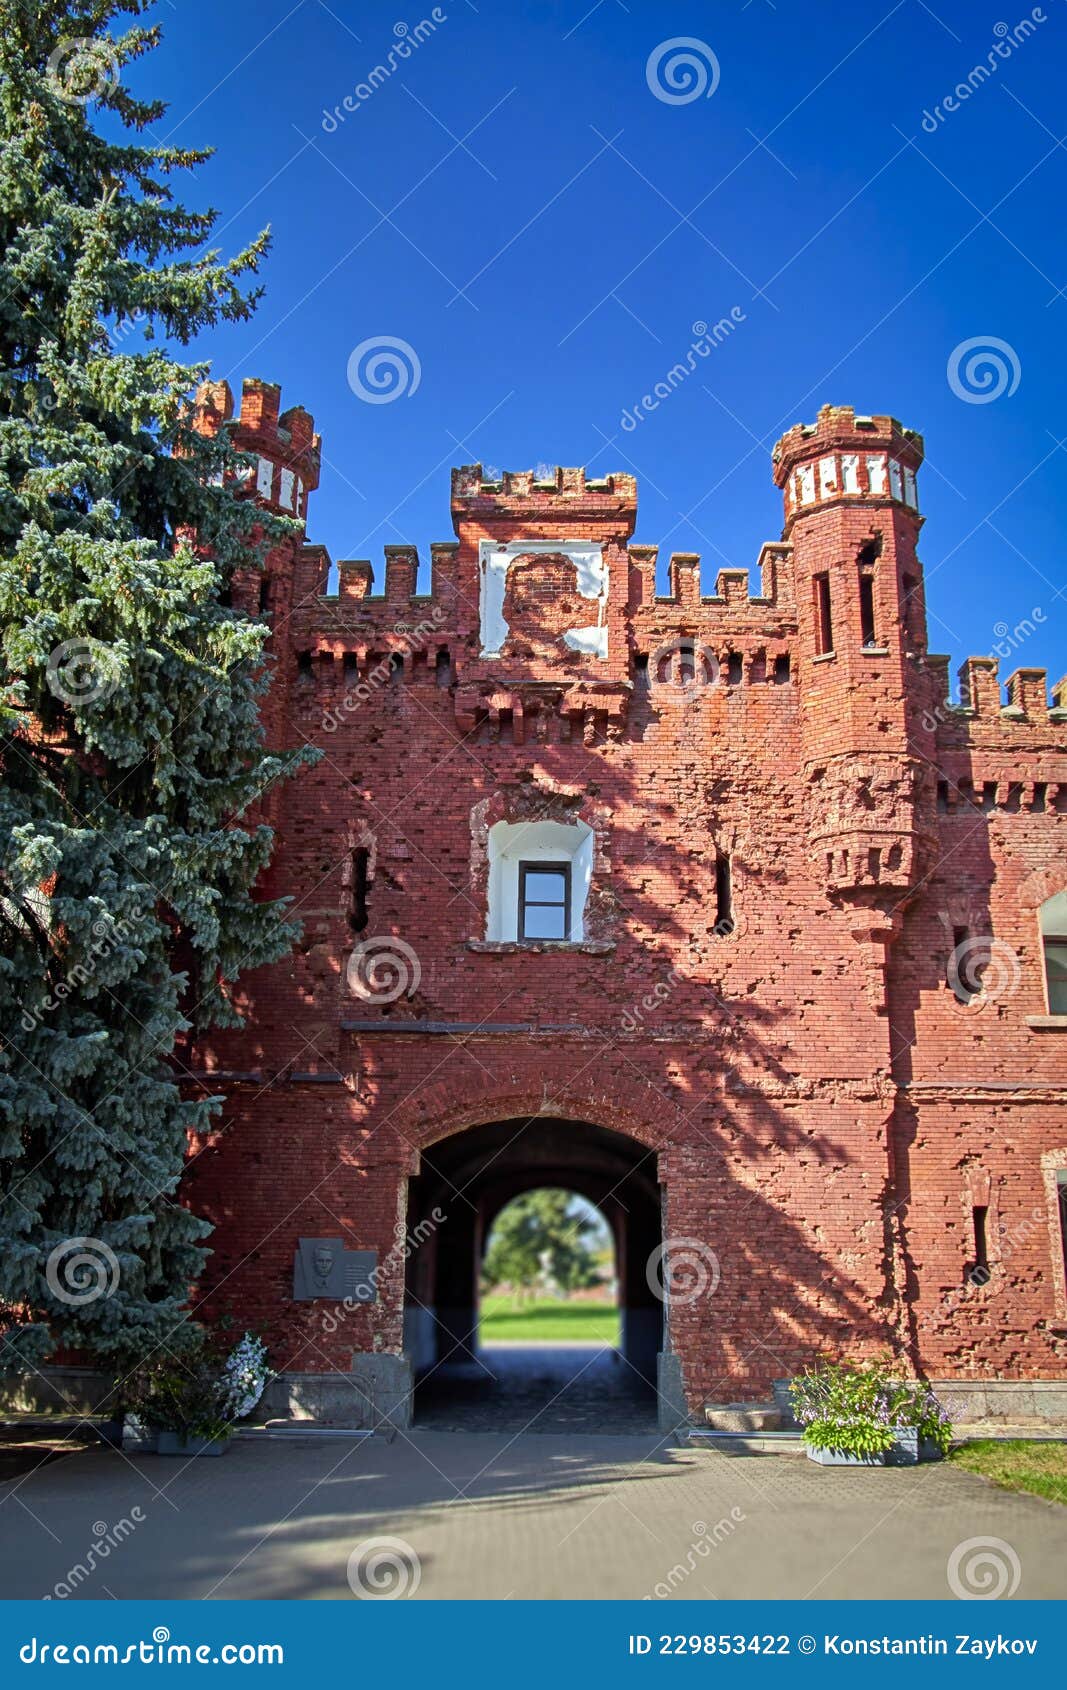 08.09.2021 Belarus-the Gates of the Brest Fortress in Sunny Weather ...